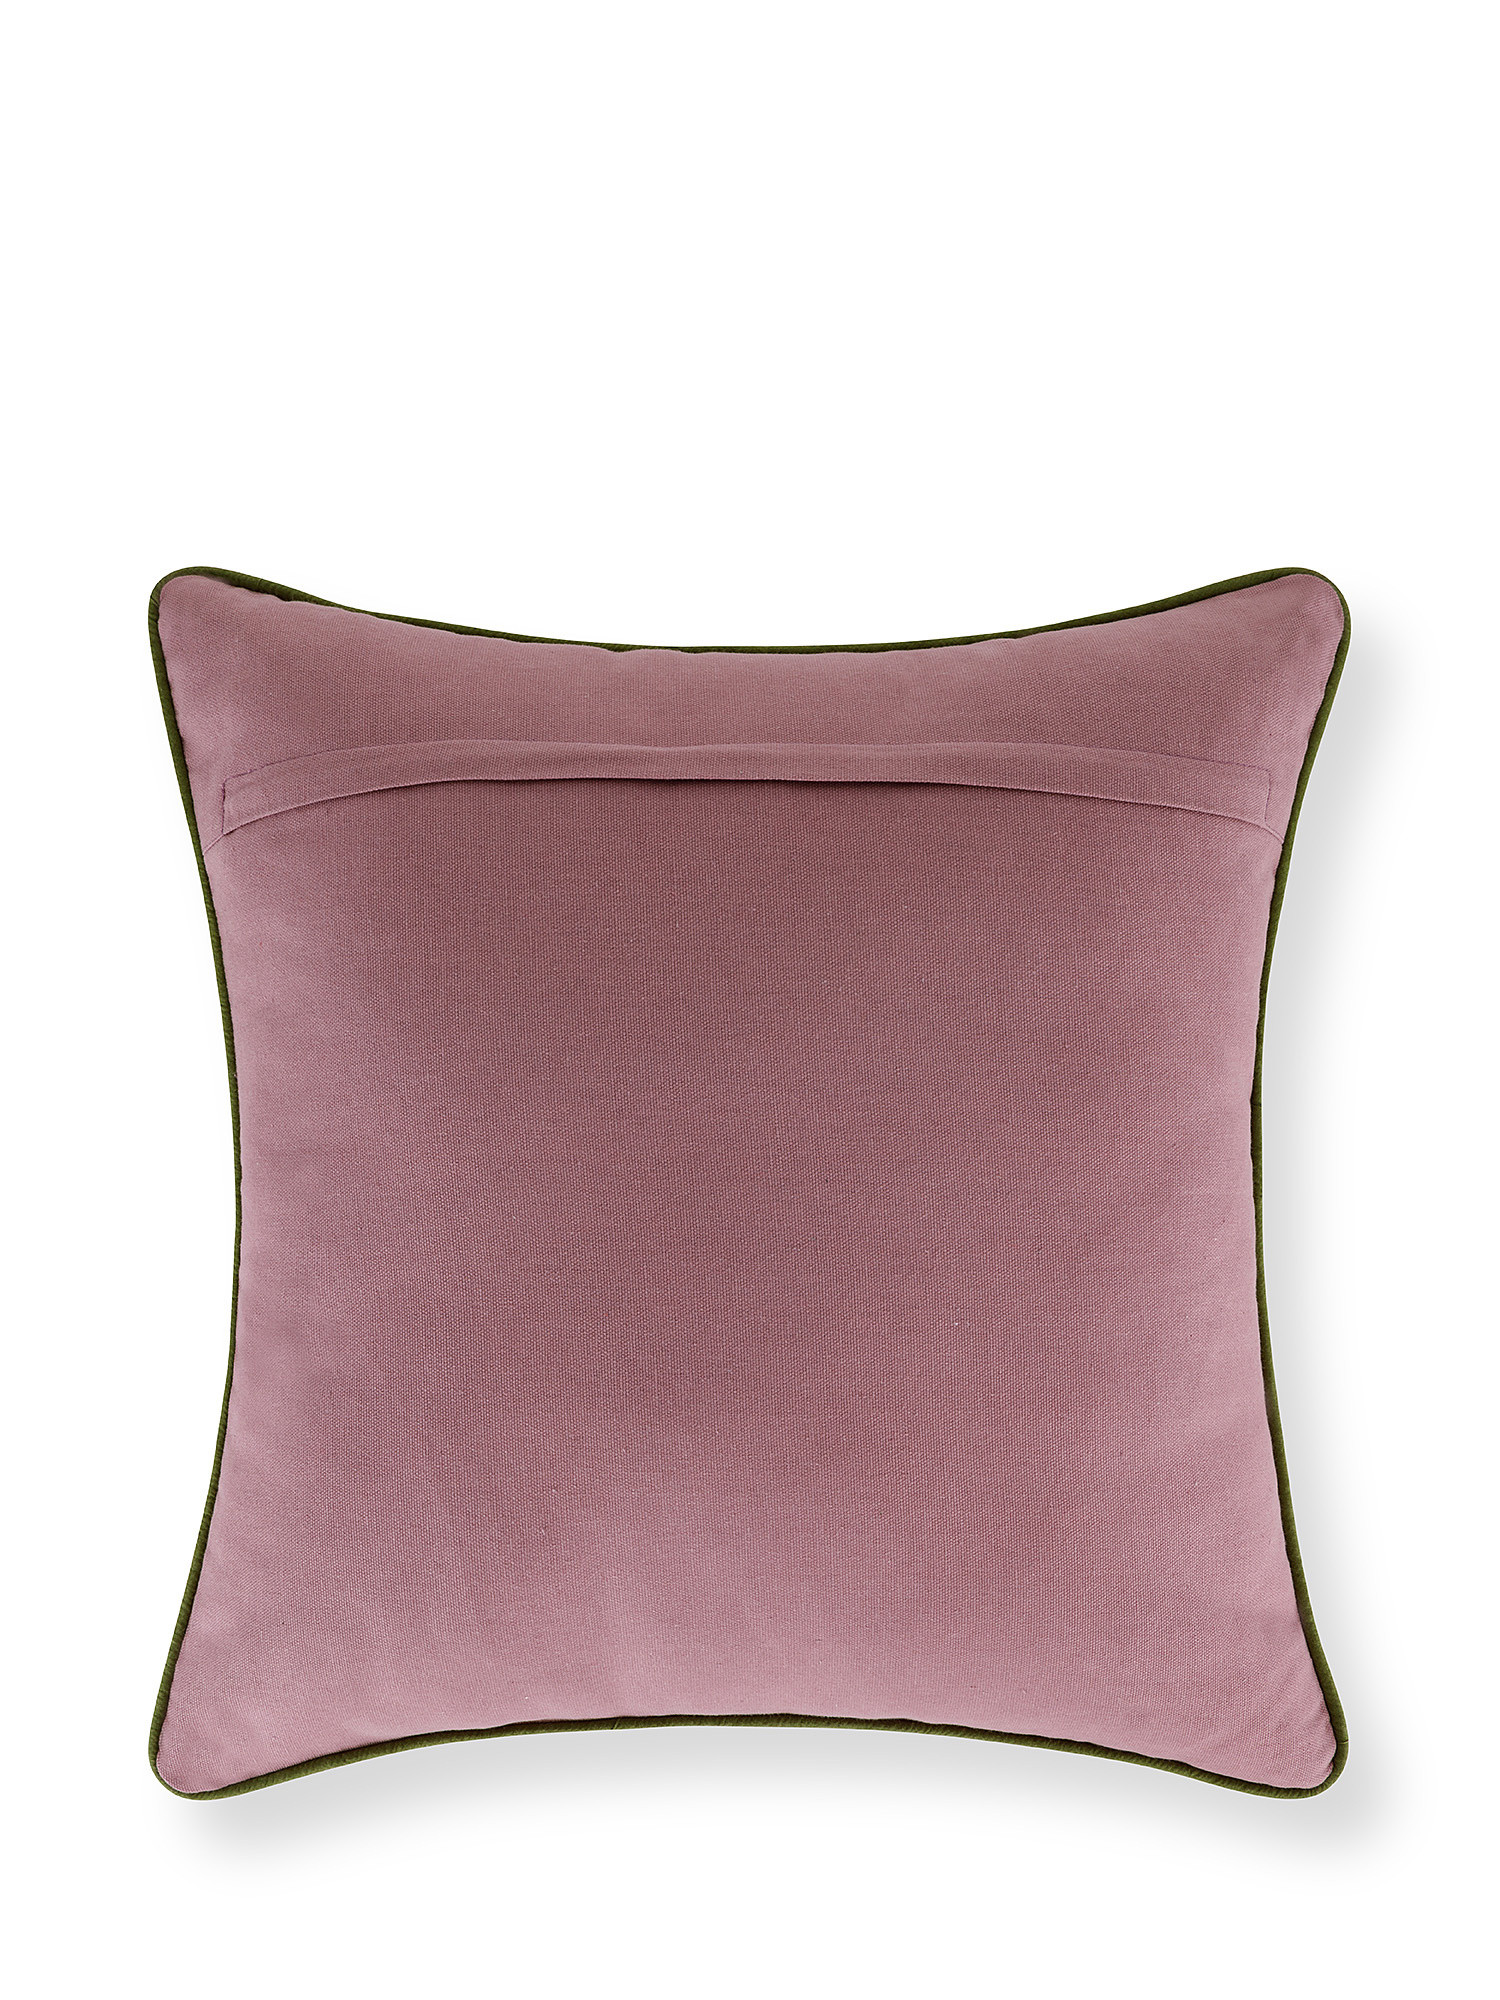 Flower embroidery cushion 45x45cm, Purple, large image number 1